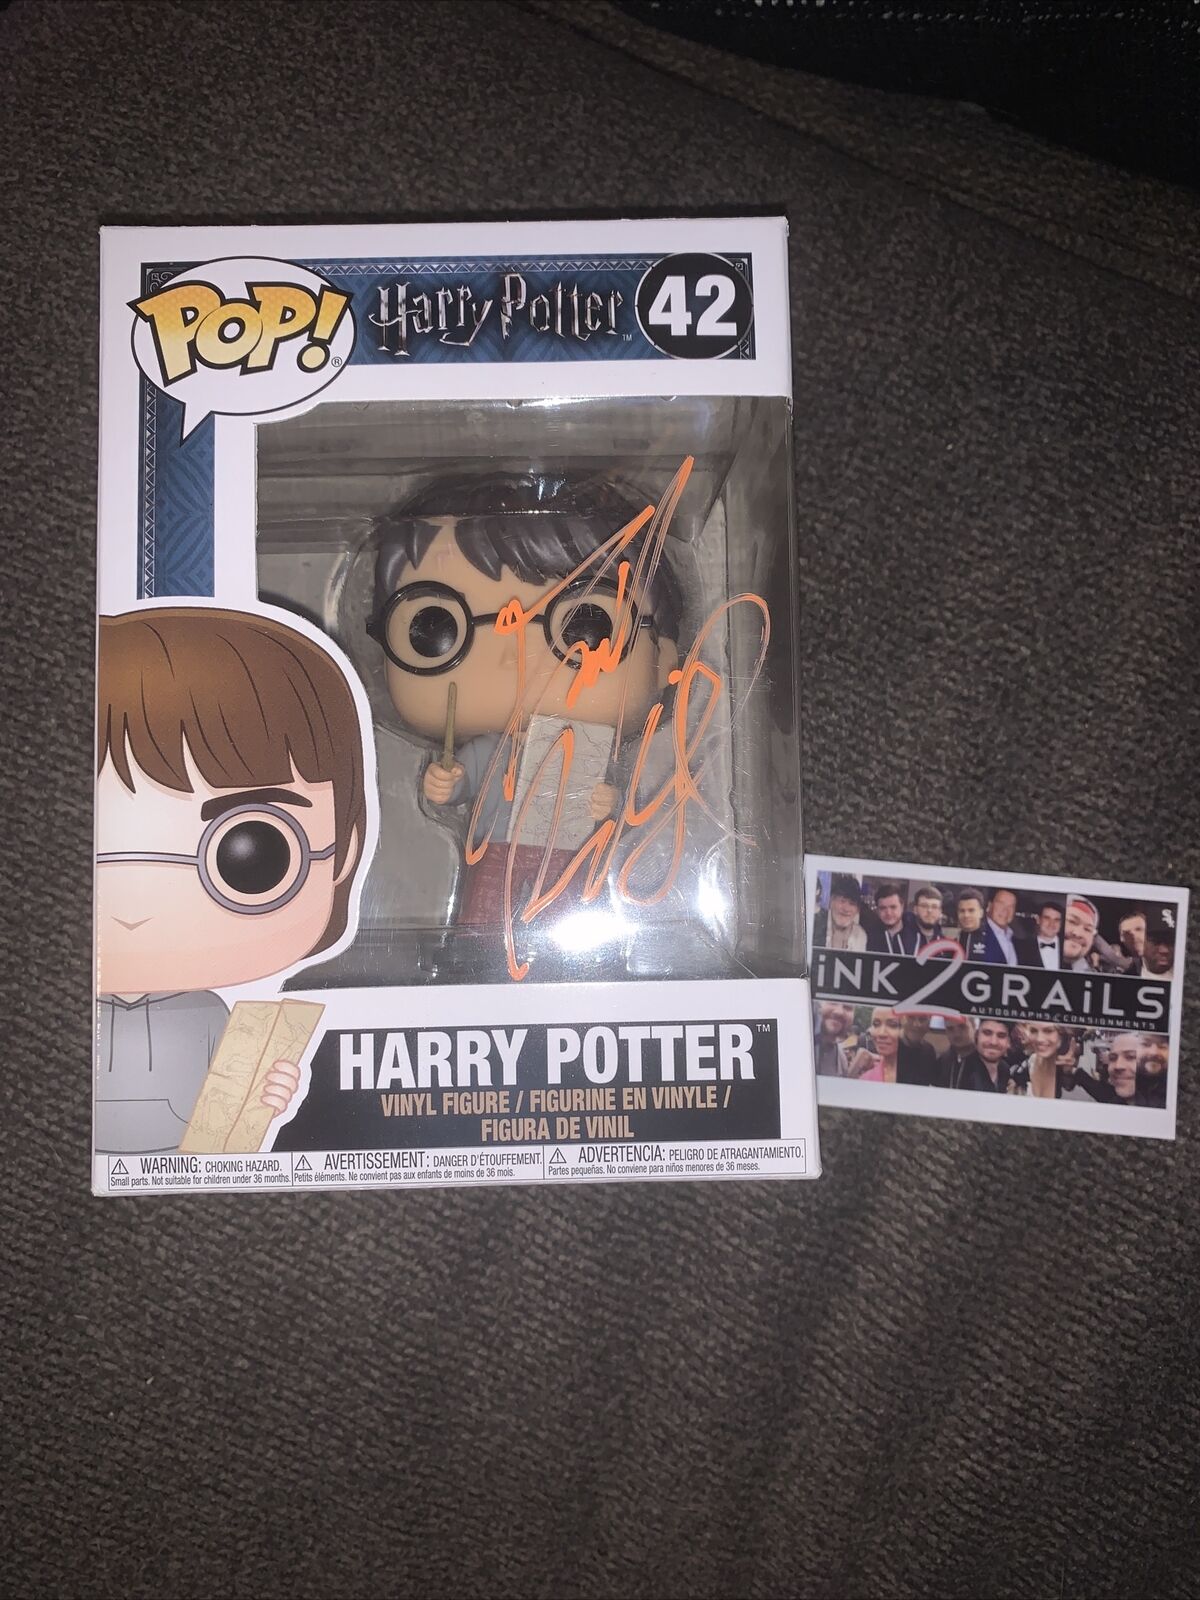 Daniel Radcliffe SIGNED HARRY POTTER FUNKO POP - authenicated